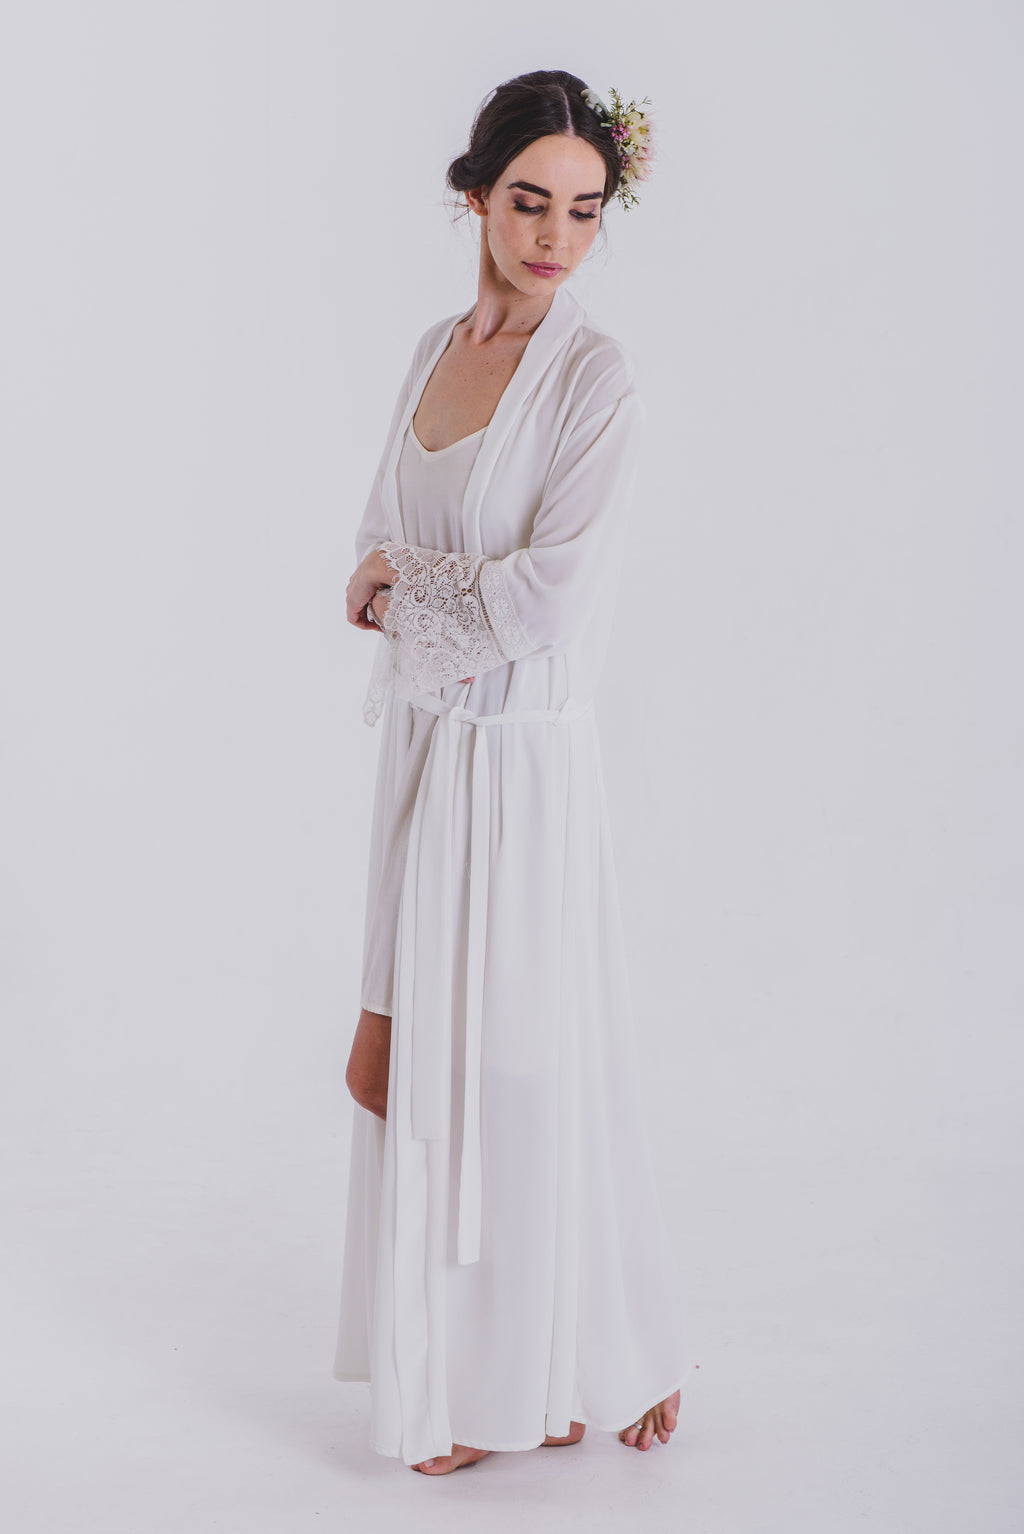 Gracie Dressing Gown - Ivory